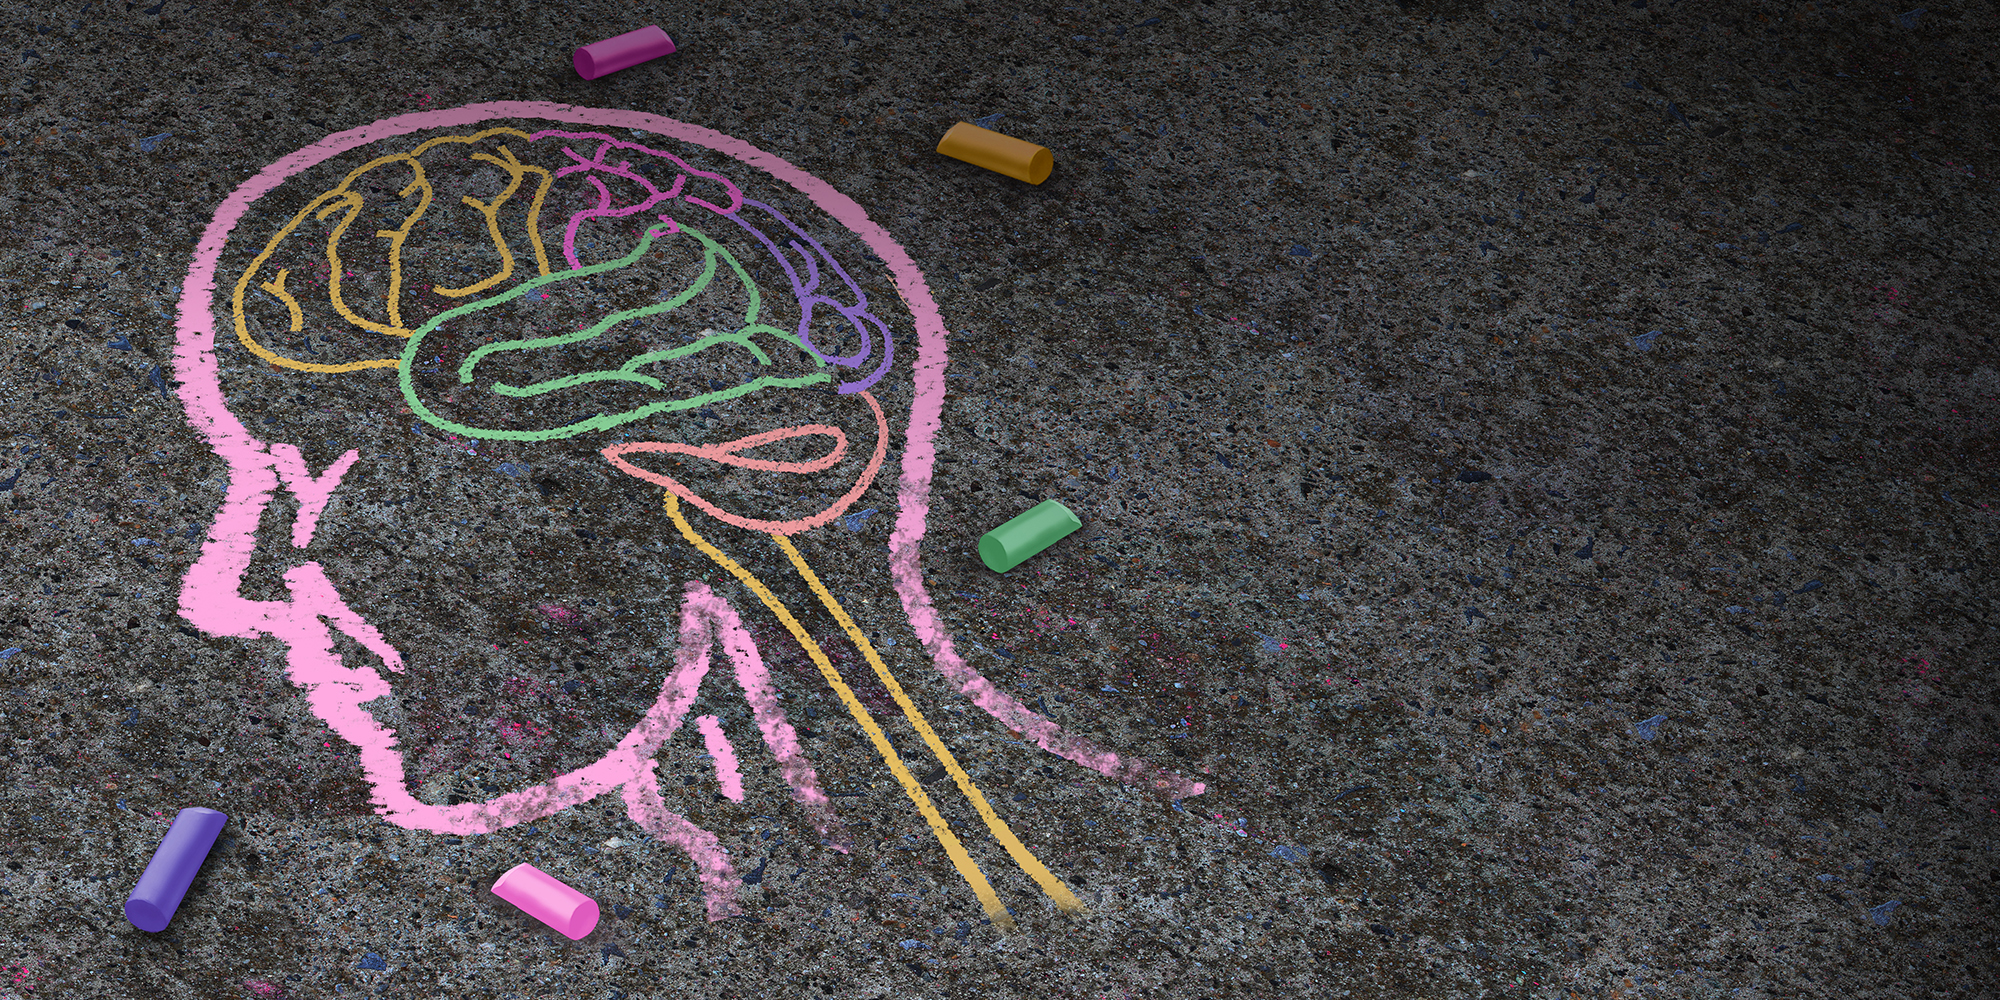 A chalk outline of a human head on a footpath